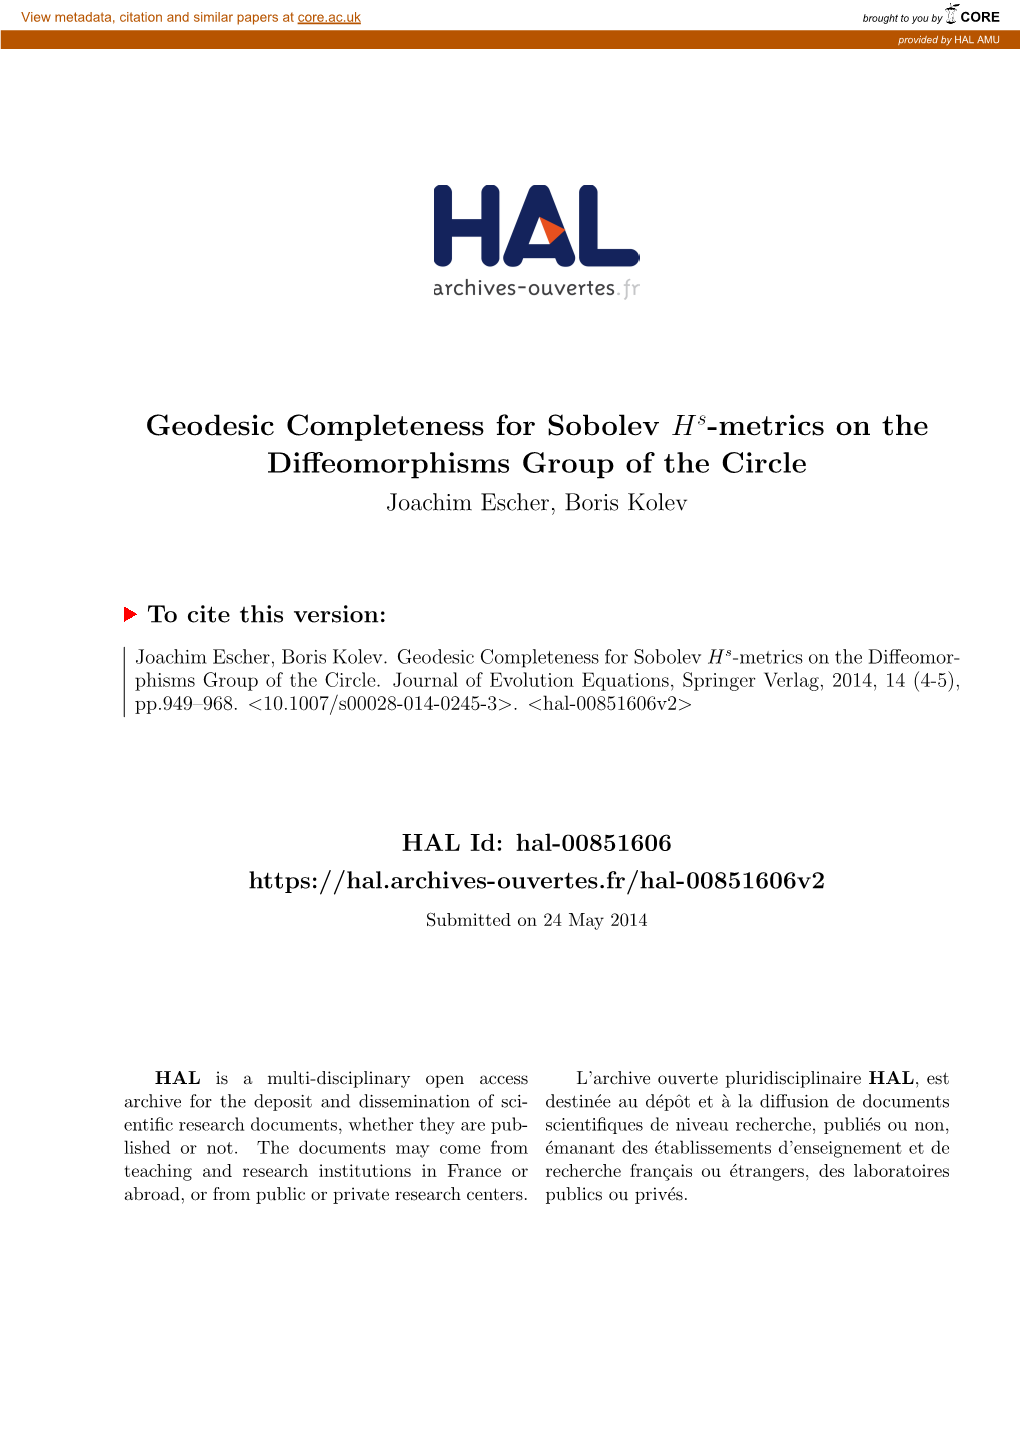 Geodesic Completeness for Sobolev Hs-Metrics on the Diffeomorphisms Group of the Circle